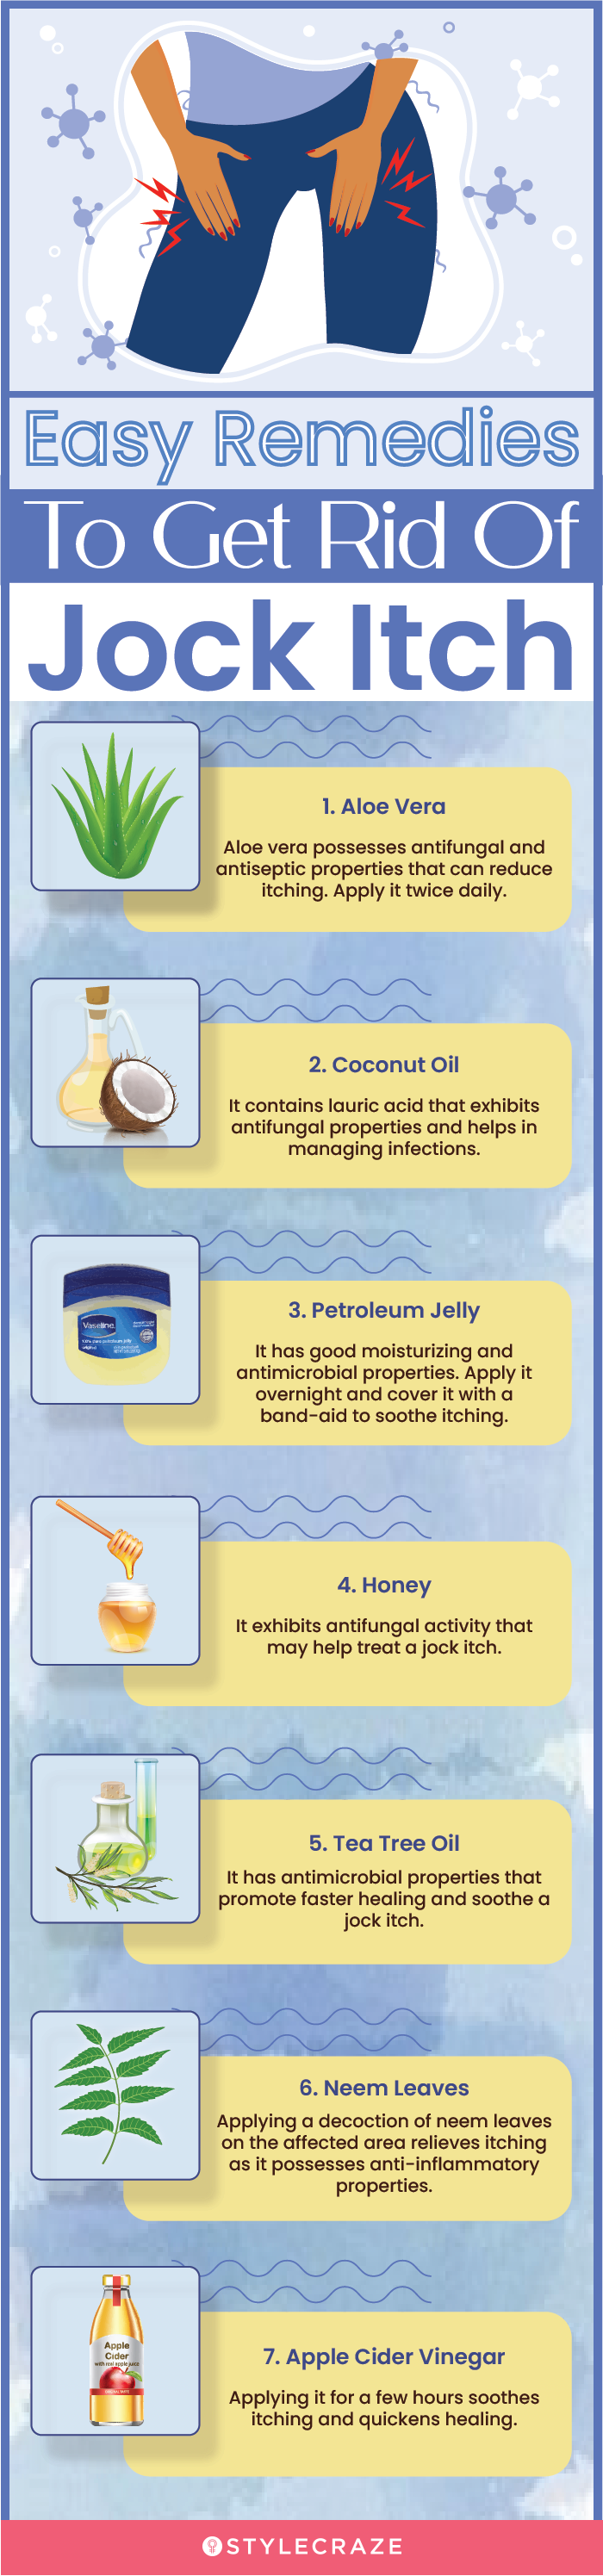 easy remedies to get rid of jock itch (infographic)